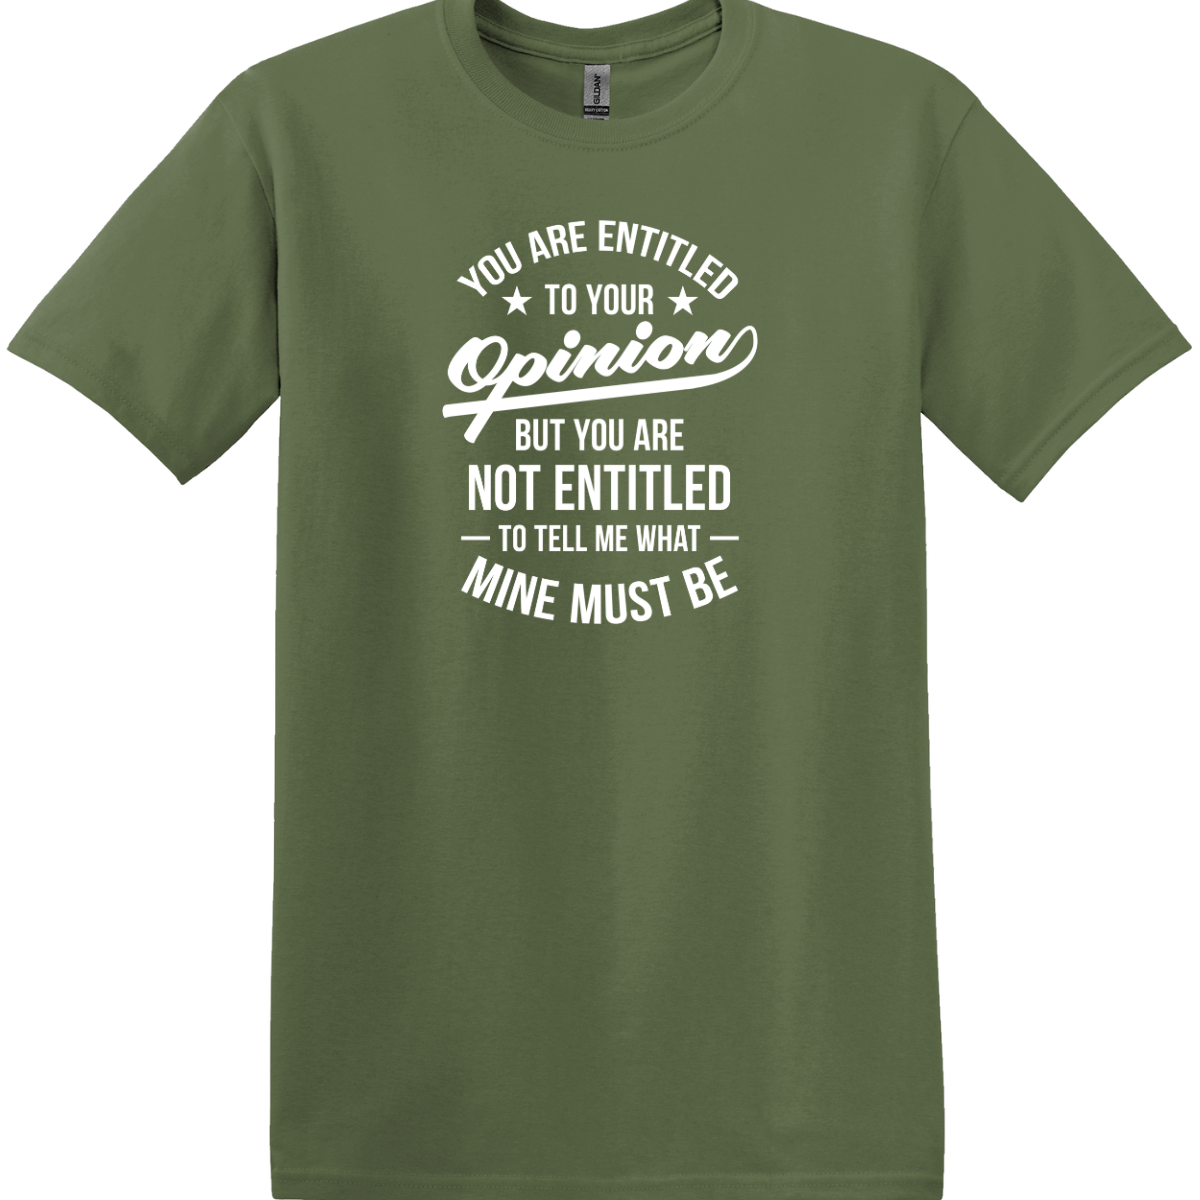 You Are Entitled to Your Opinion Tee